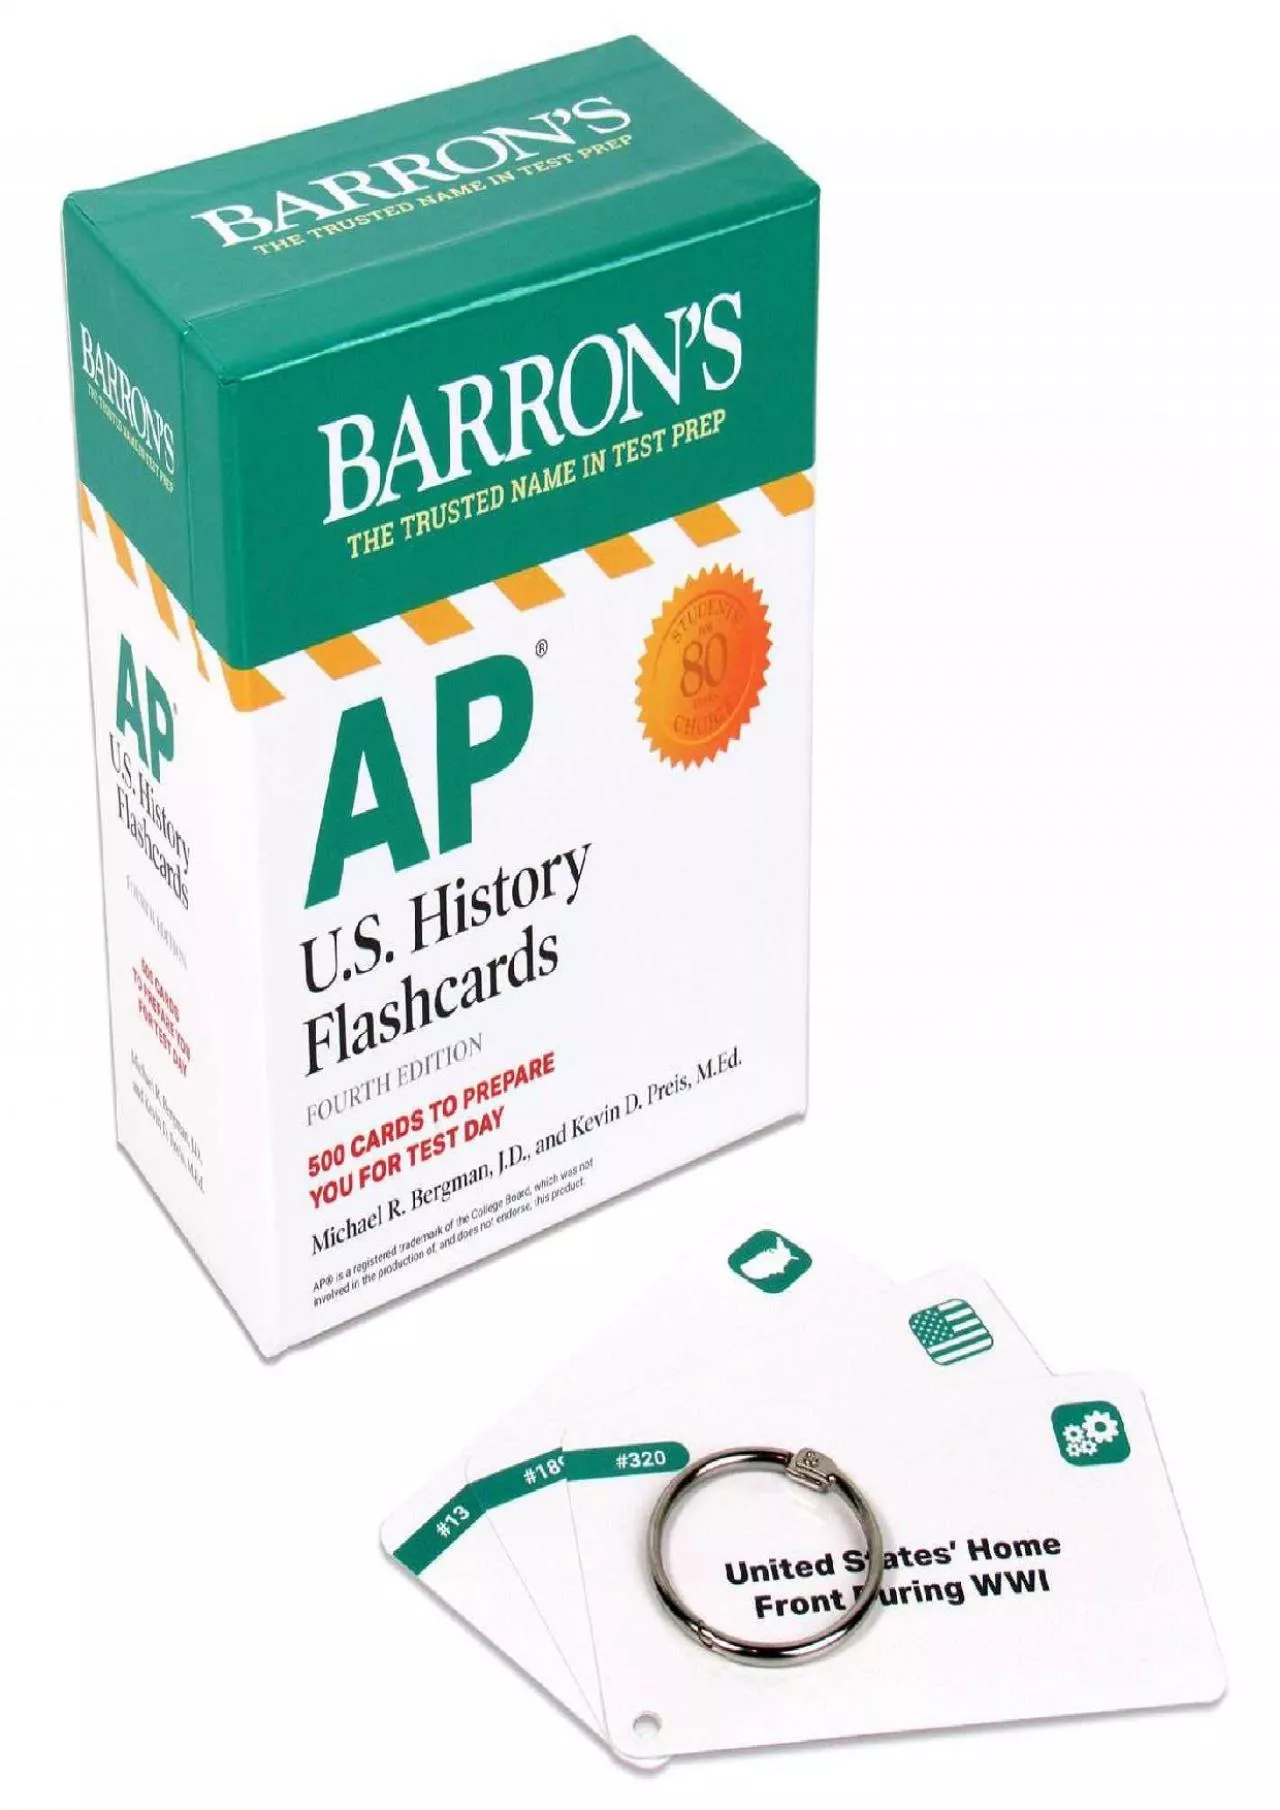 [EBOOK] AP U.S. History Flashcards, Fourth Edition: Up-to-Date Review + Sorting Ring for